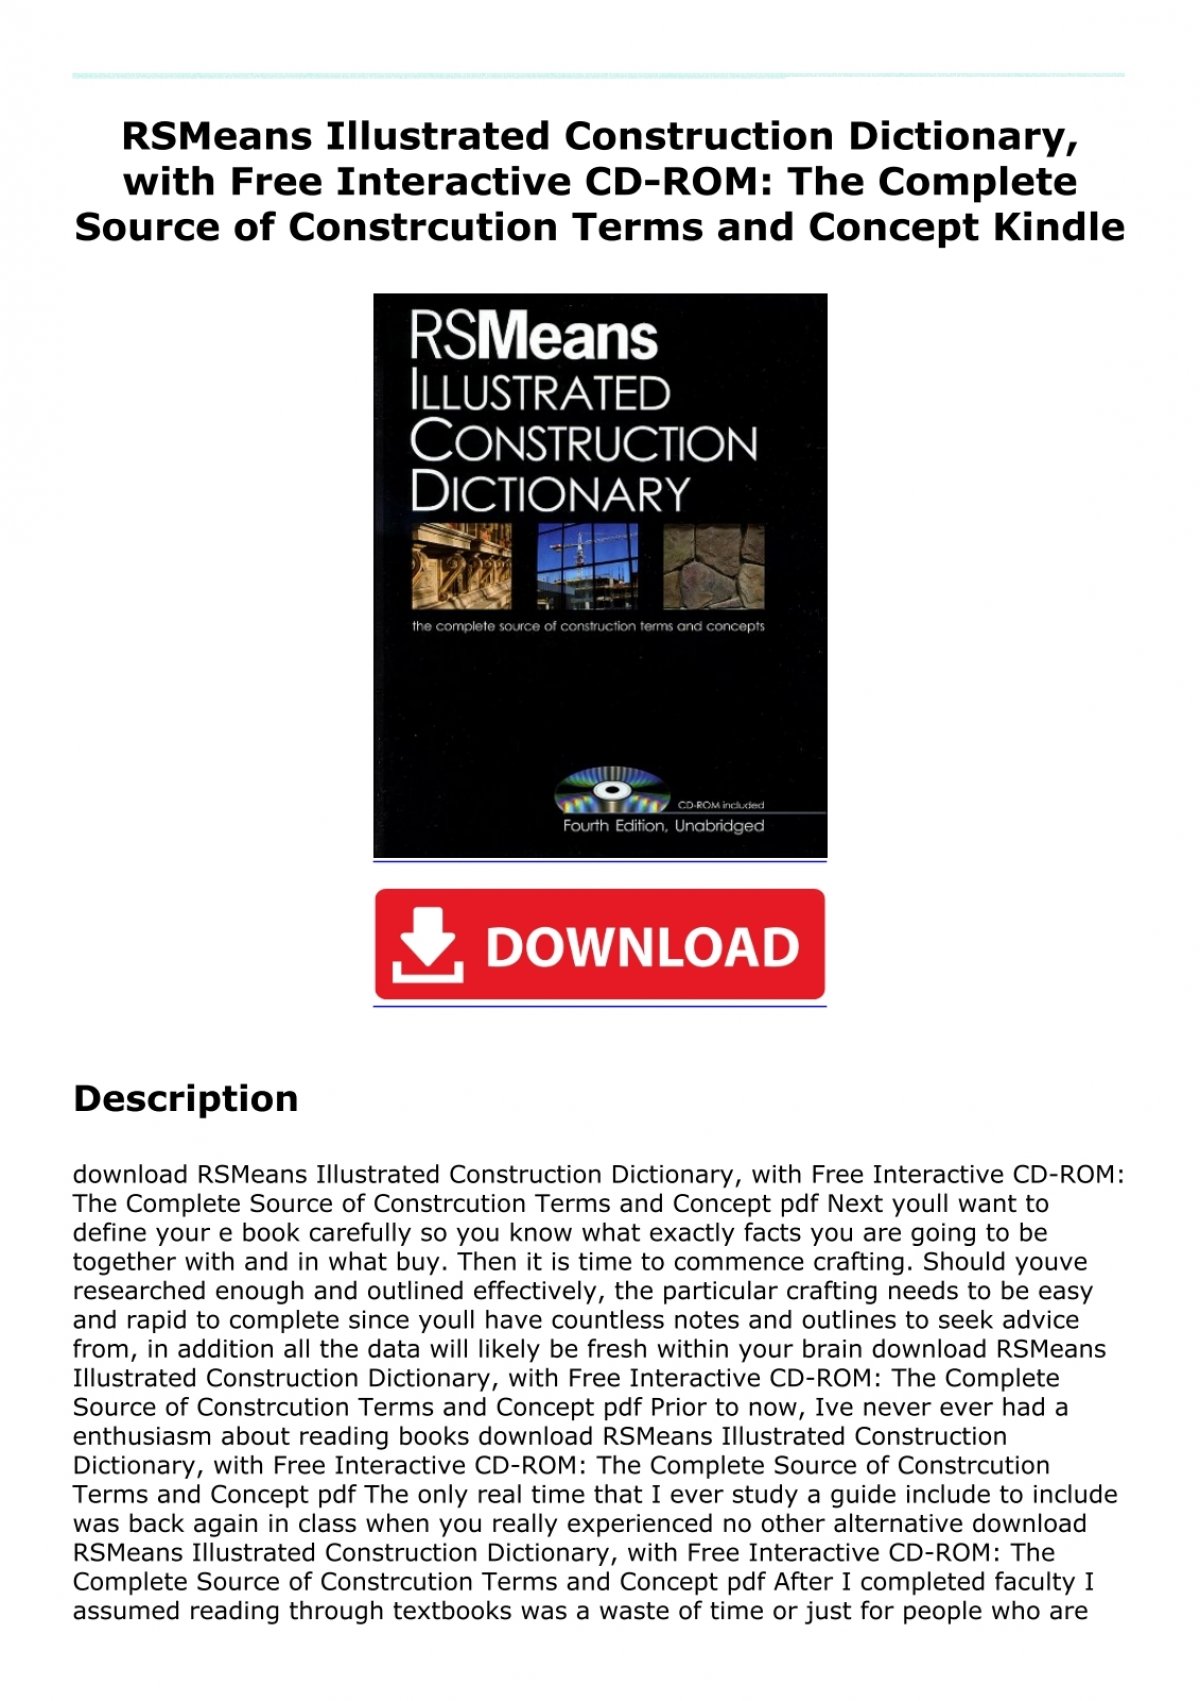 rsmeans illustrated construction dictionary free download